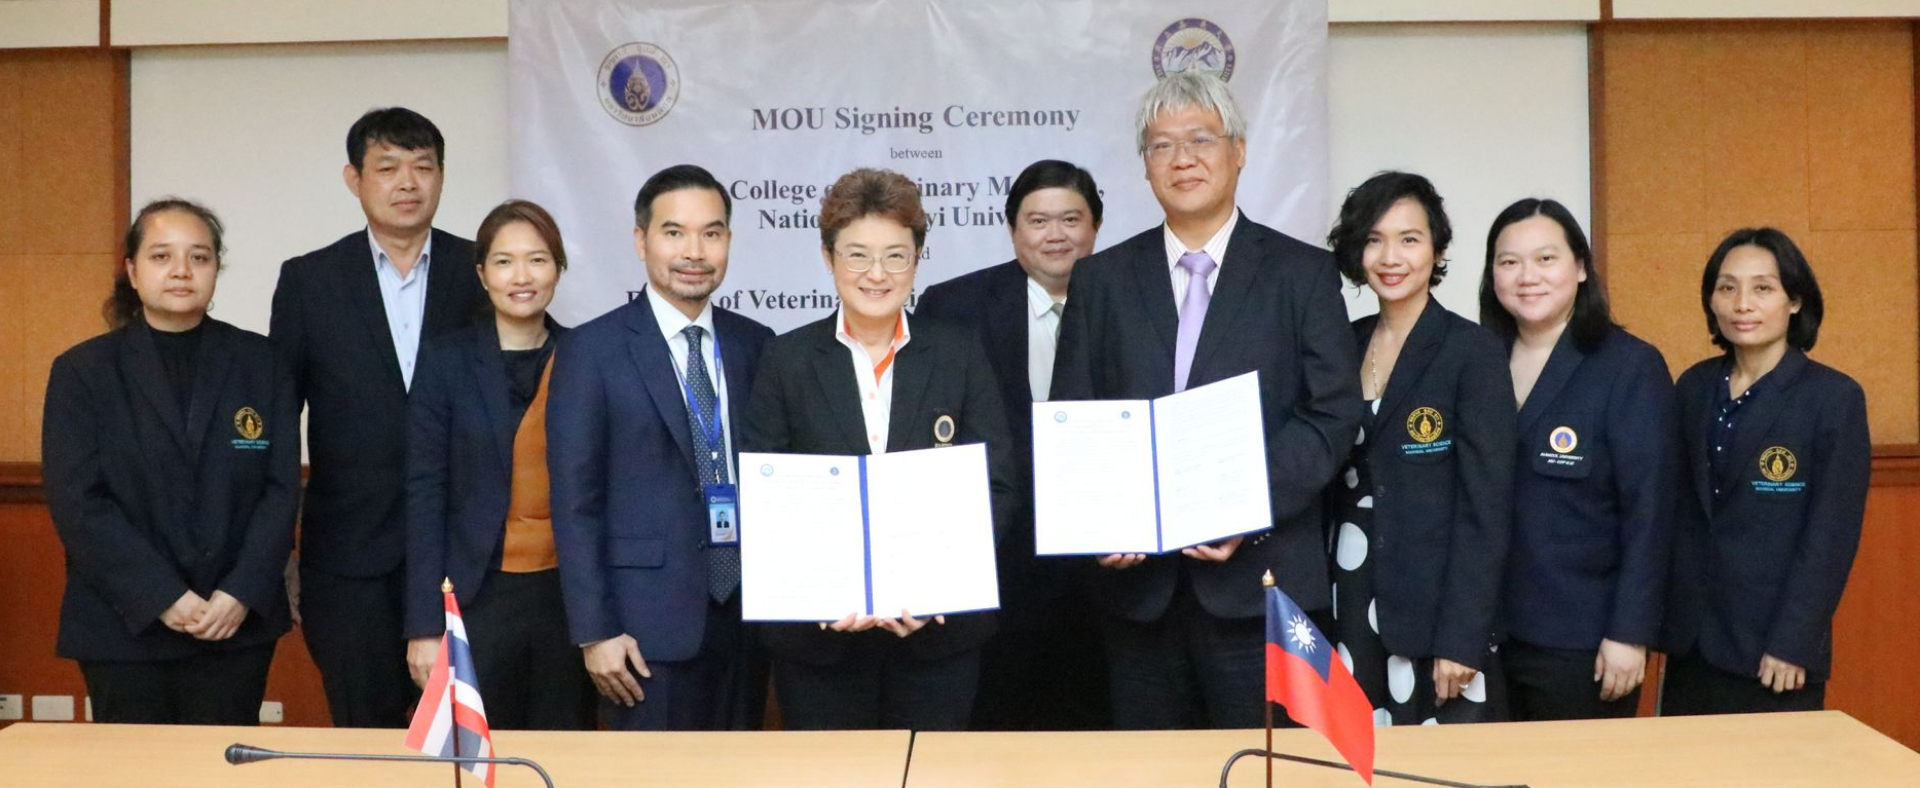 Sign MOU with Faculty of Veterinary Science, Mahidol University, Thailand